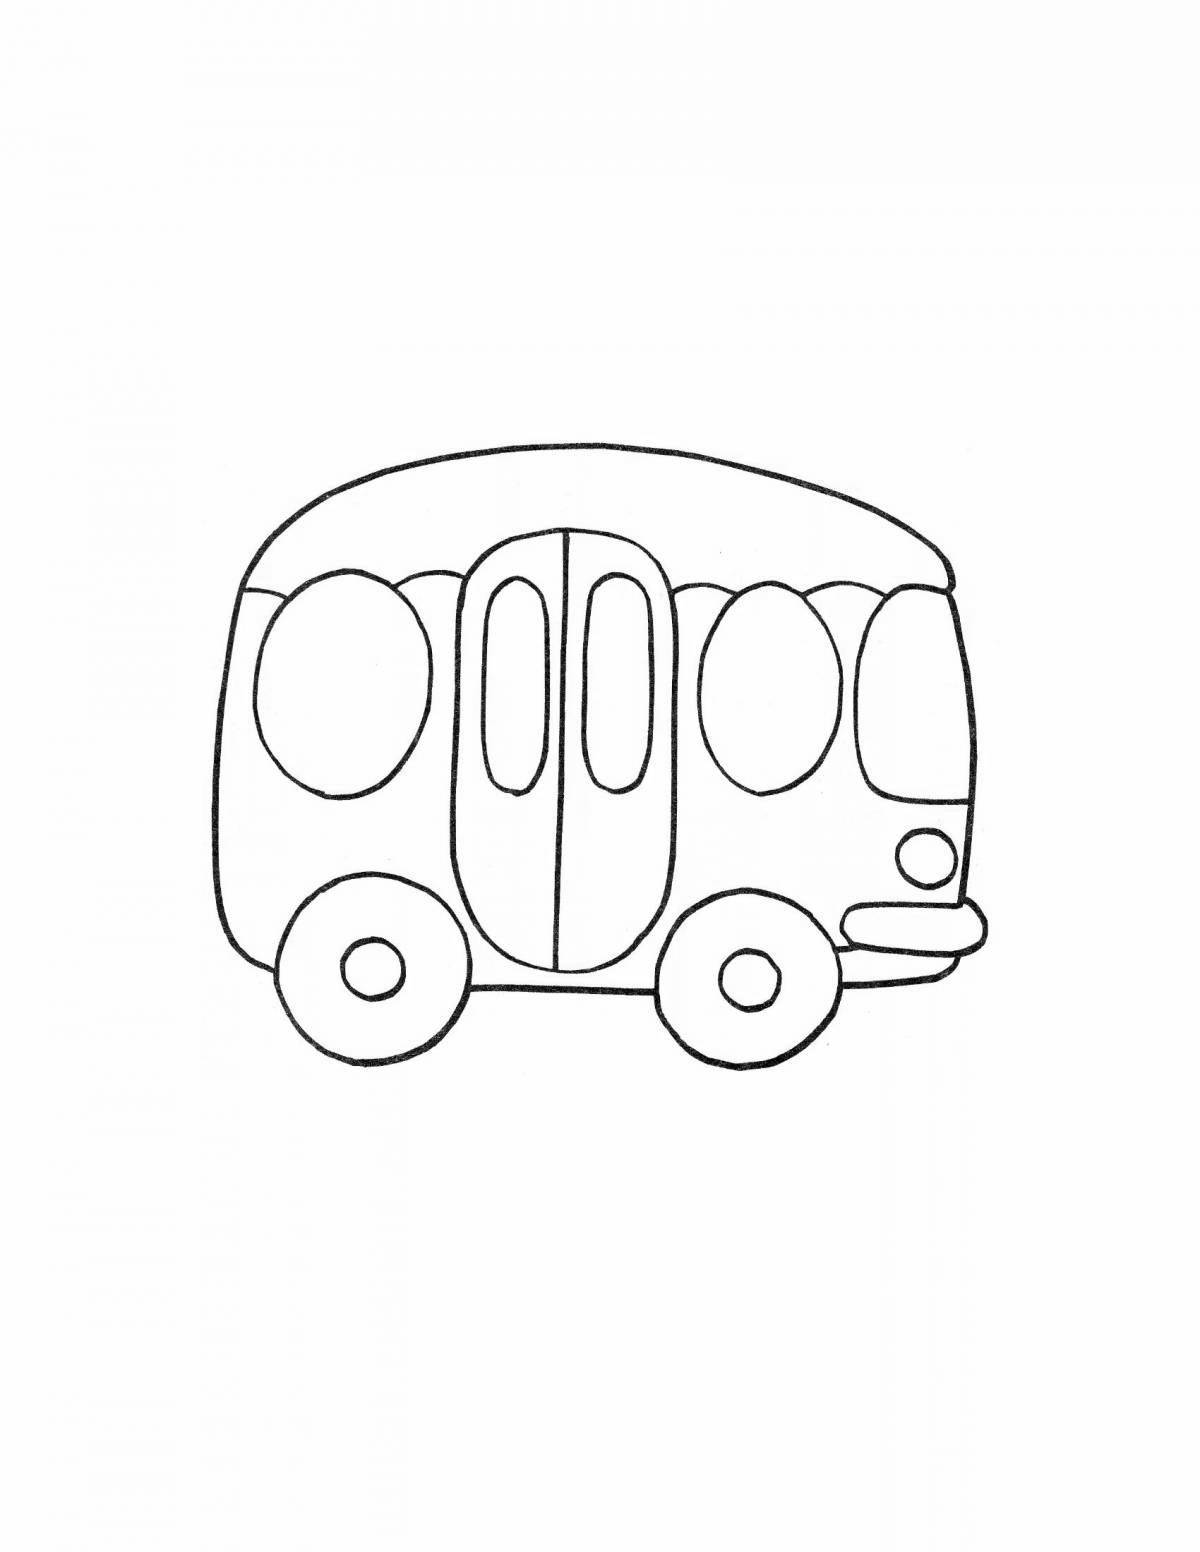 Flowering bus coloring page